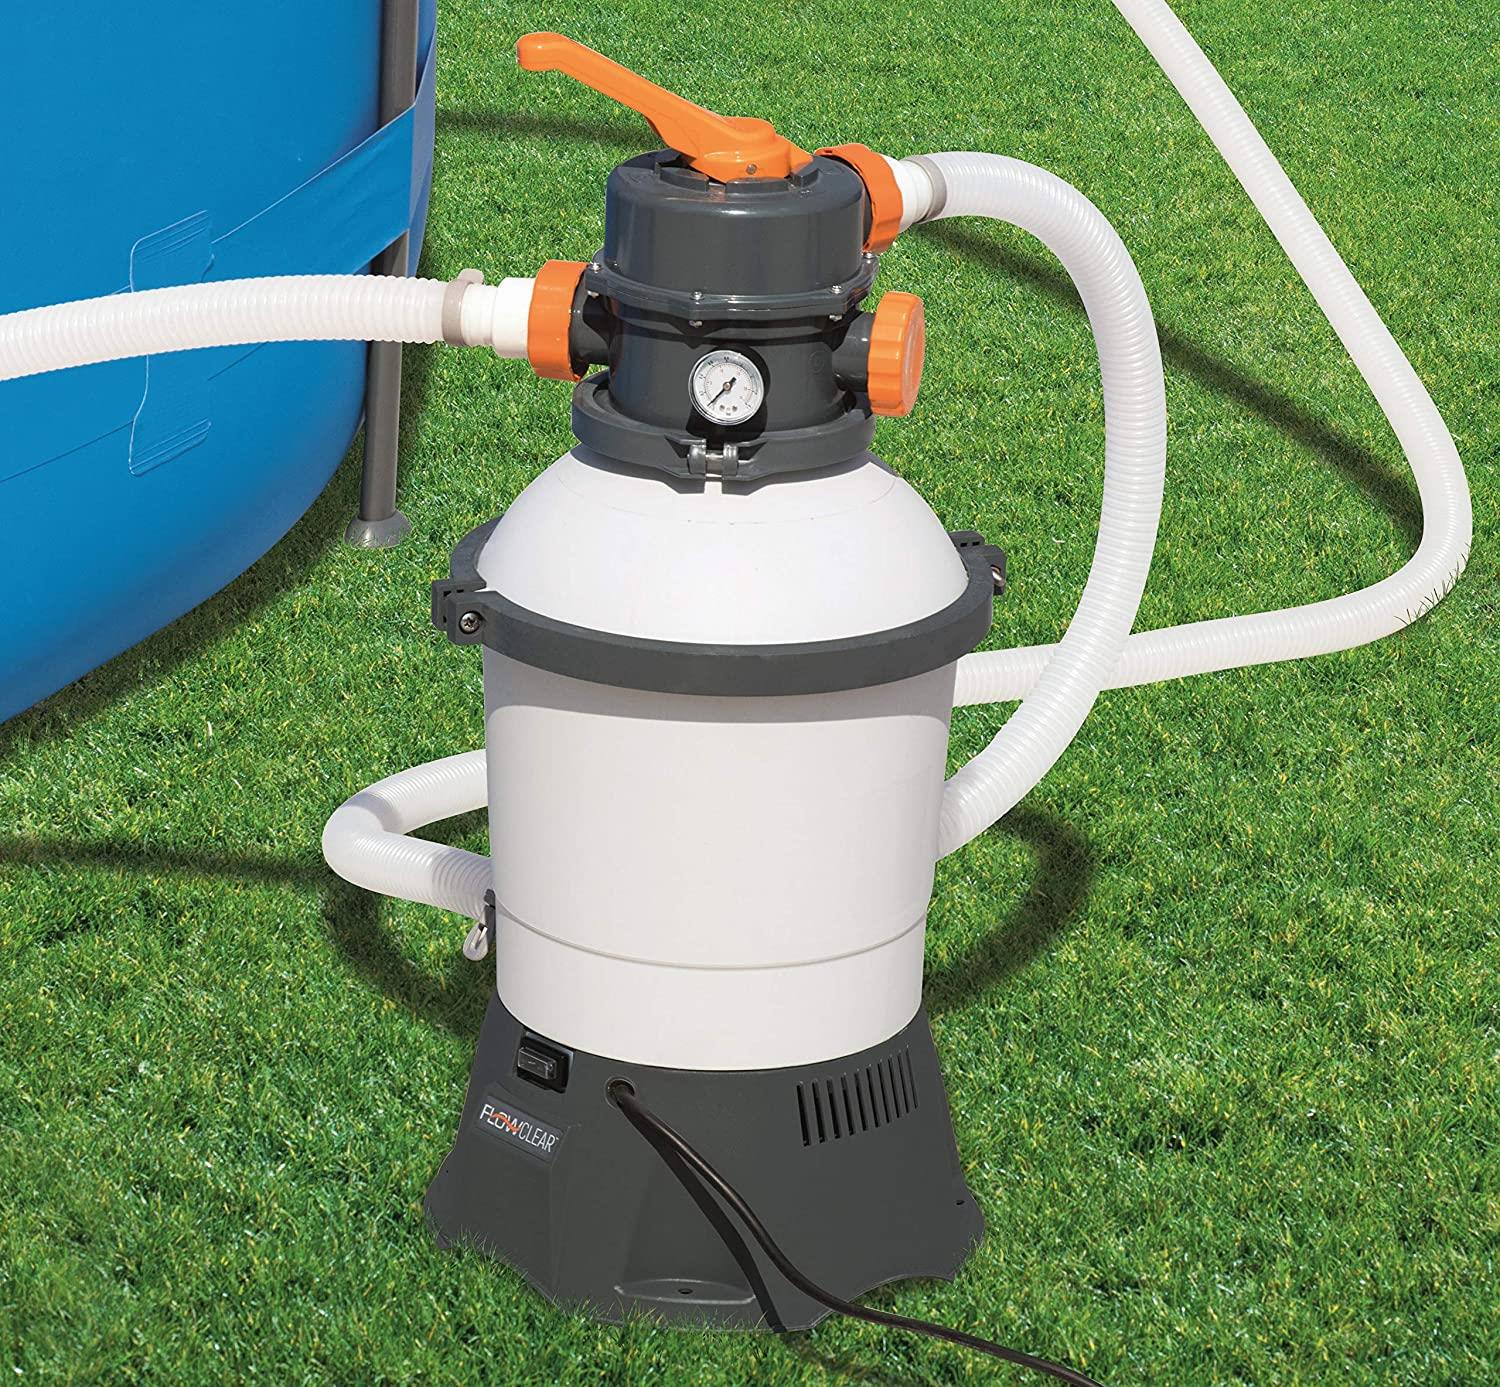 Bastway Flowclear 800Gal Sand Filter System by Geezy - The Magic Toy Shop